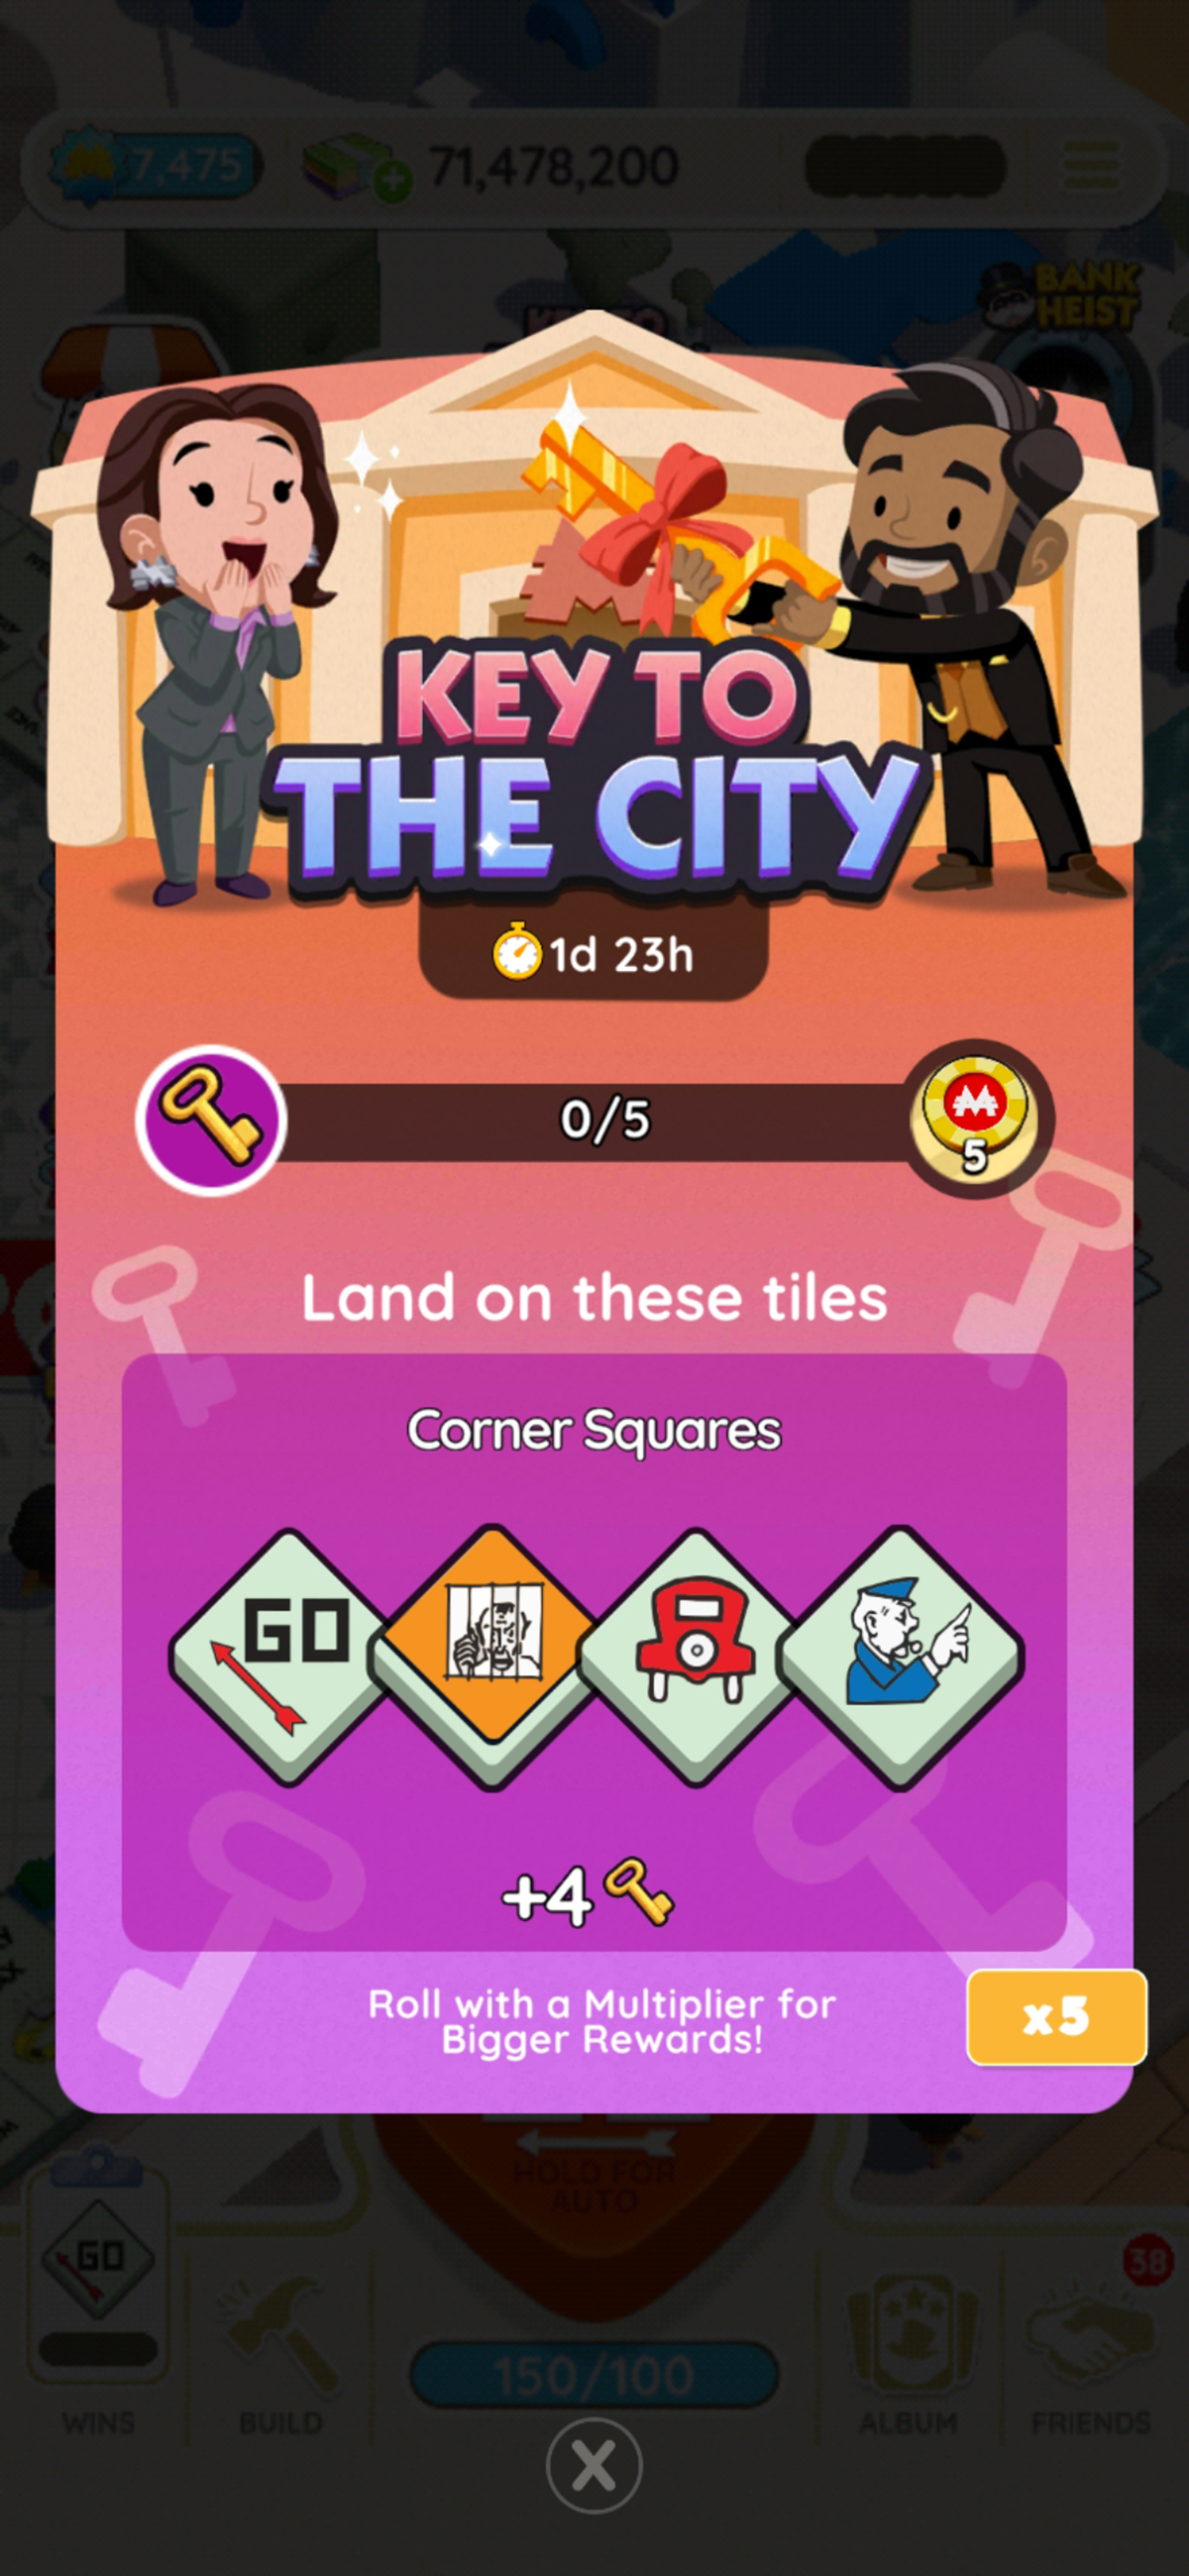 An image from the Monopoly GO Key to the City event showing a man holding a key to the city as a woman looks on in awe, as part of an article on all the rewards and milestones in the event, listed.